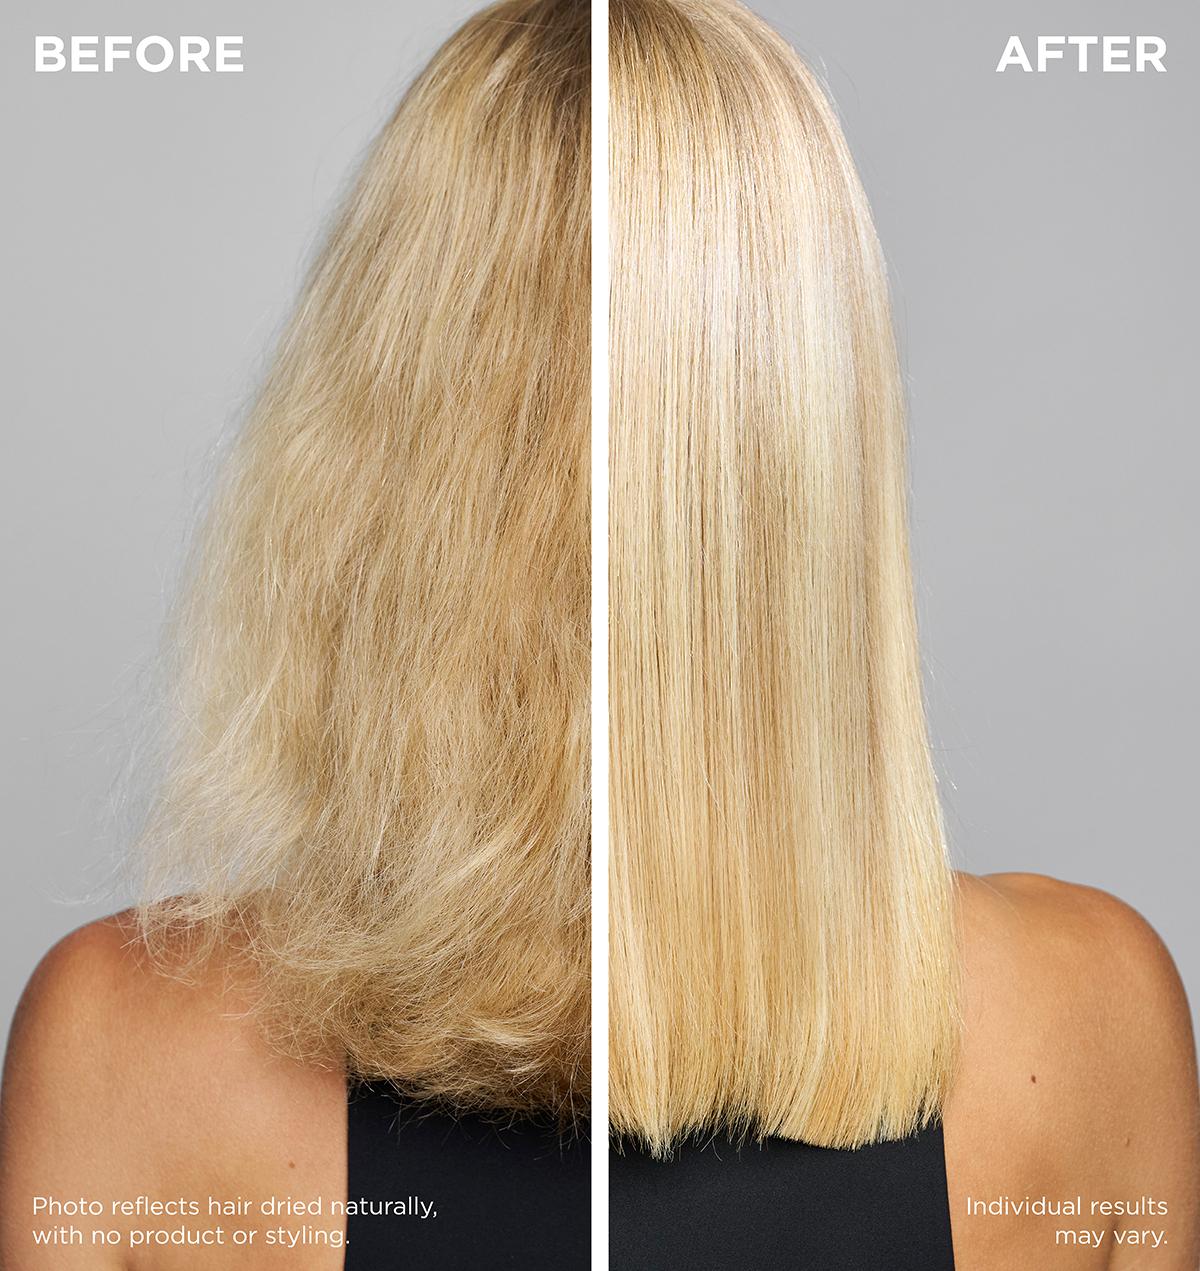 A before and after photo where the model's hair is notably healthier with less frizz and more shine in the after photo.